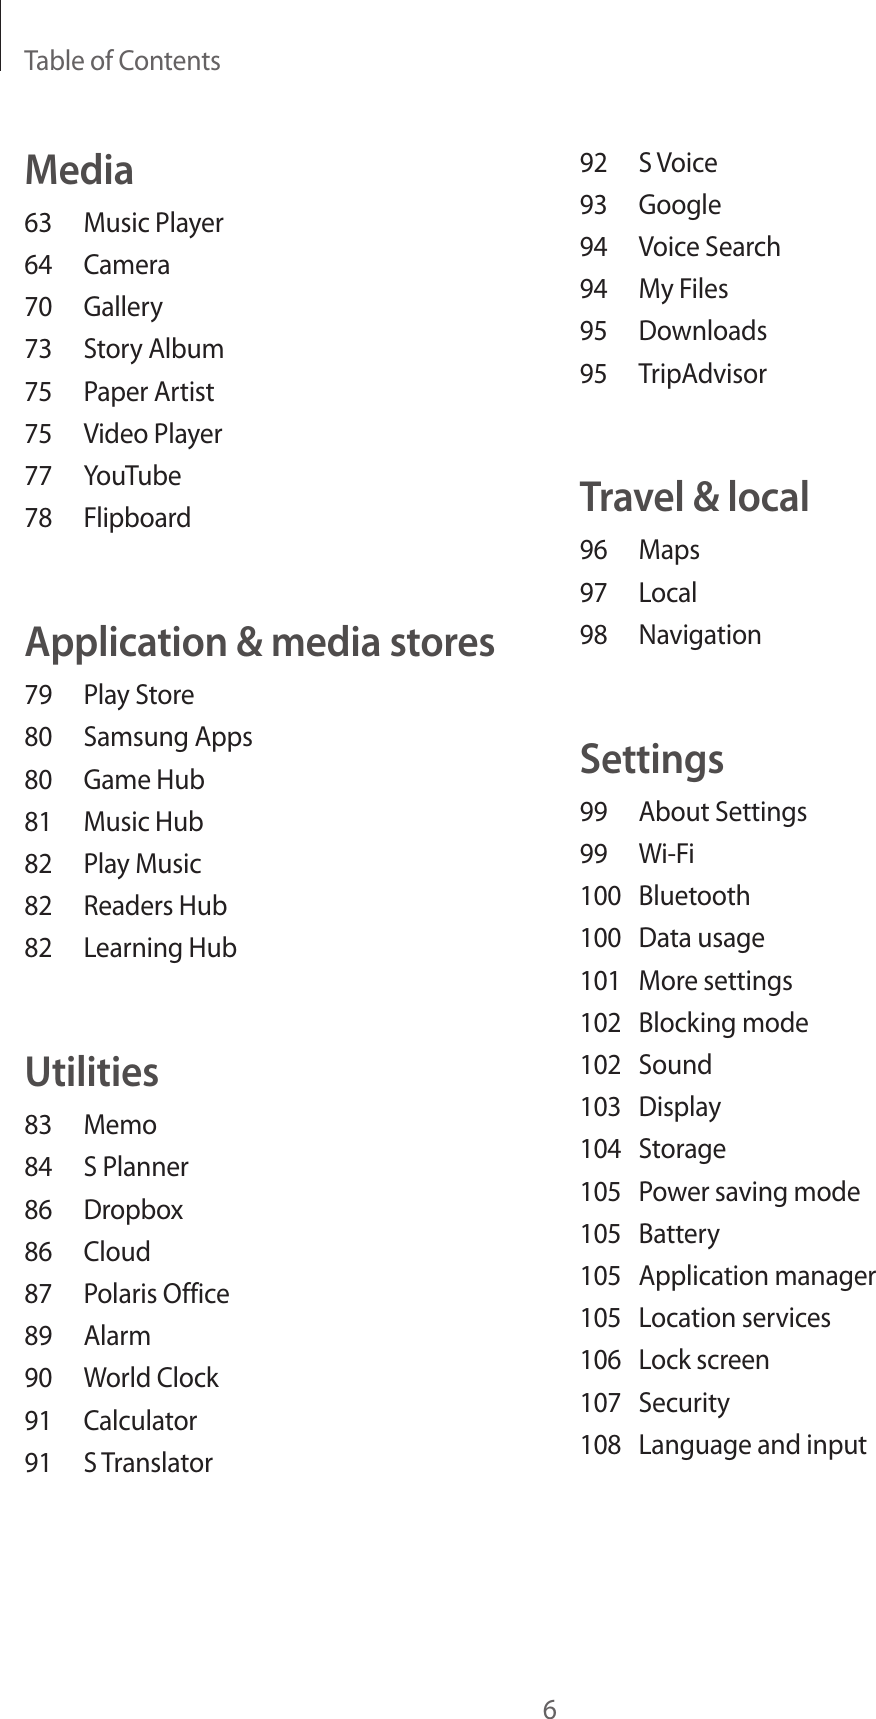 Table of Contents692  S Voice93 Google94  Voice Search94  My Files95 Downloads95 TripAdvisorTravel &amp; local96 Maps97 Local98 NavigationSettings99  About Settings99 Wi-Fi100 Bluetooth100  Data usage101  More settings102  Blocking mode102 Sound103 Display104 Storage105  Power saving mode105 Battery105  Application manager105  Location services106  Lock screen107 Security108  Language and inputMedia63  Music Player64 Camera70 Gallery73  Story Album75  Paper Artist75  Video Player77 YouTube78 FlipboardApplication &amp; media stores79  Play Store80  Samsung Apps80  Game Hub81  Music Hub82  Play Music82  Readers Hub82  Learning HubUtilities83 Memo84  S Planner86 Dropbox86 Cloud87  Polaris Office89 Alarm90  World Clock91 Calculator91  S Translator